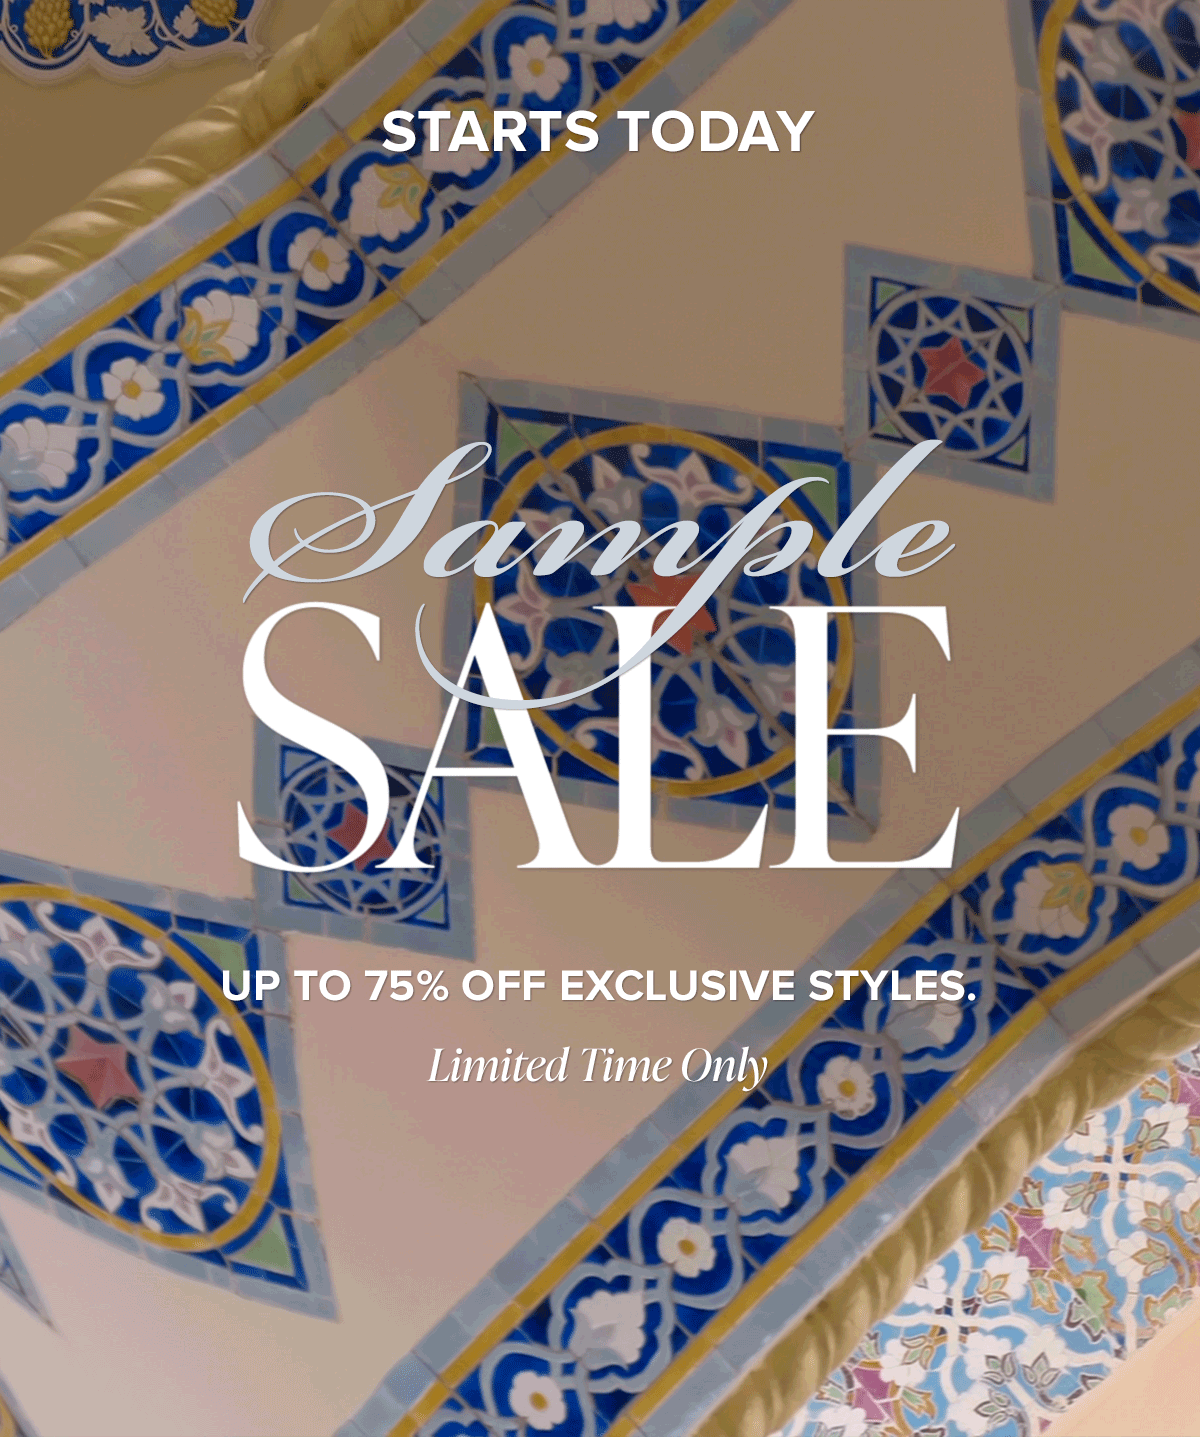 STARTS TODAY: SAMPLE SALE UP TO 70% OFF EXCLUSIVE STYLES. LIMITED TIME ONLY.